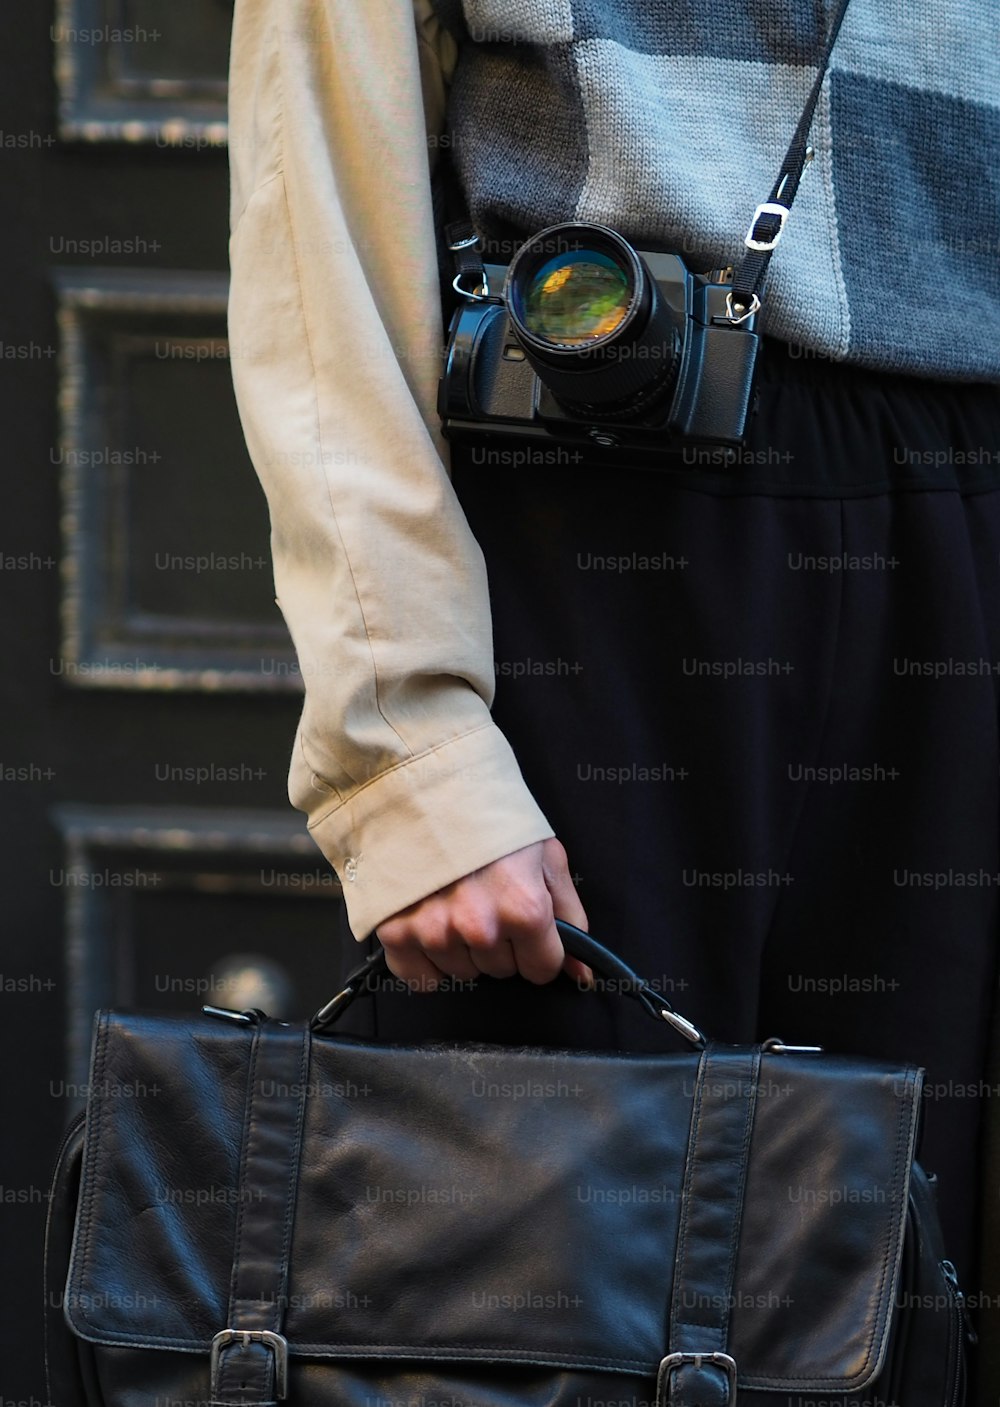 a person holding a black bag and a camera